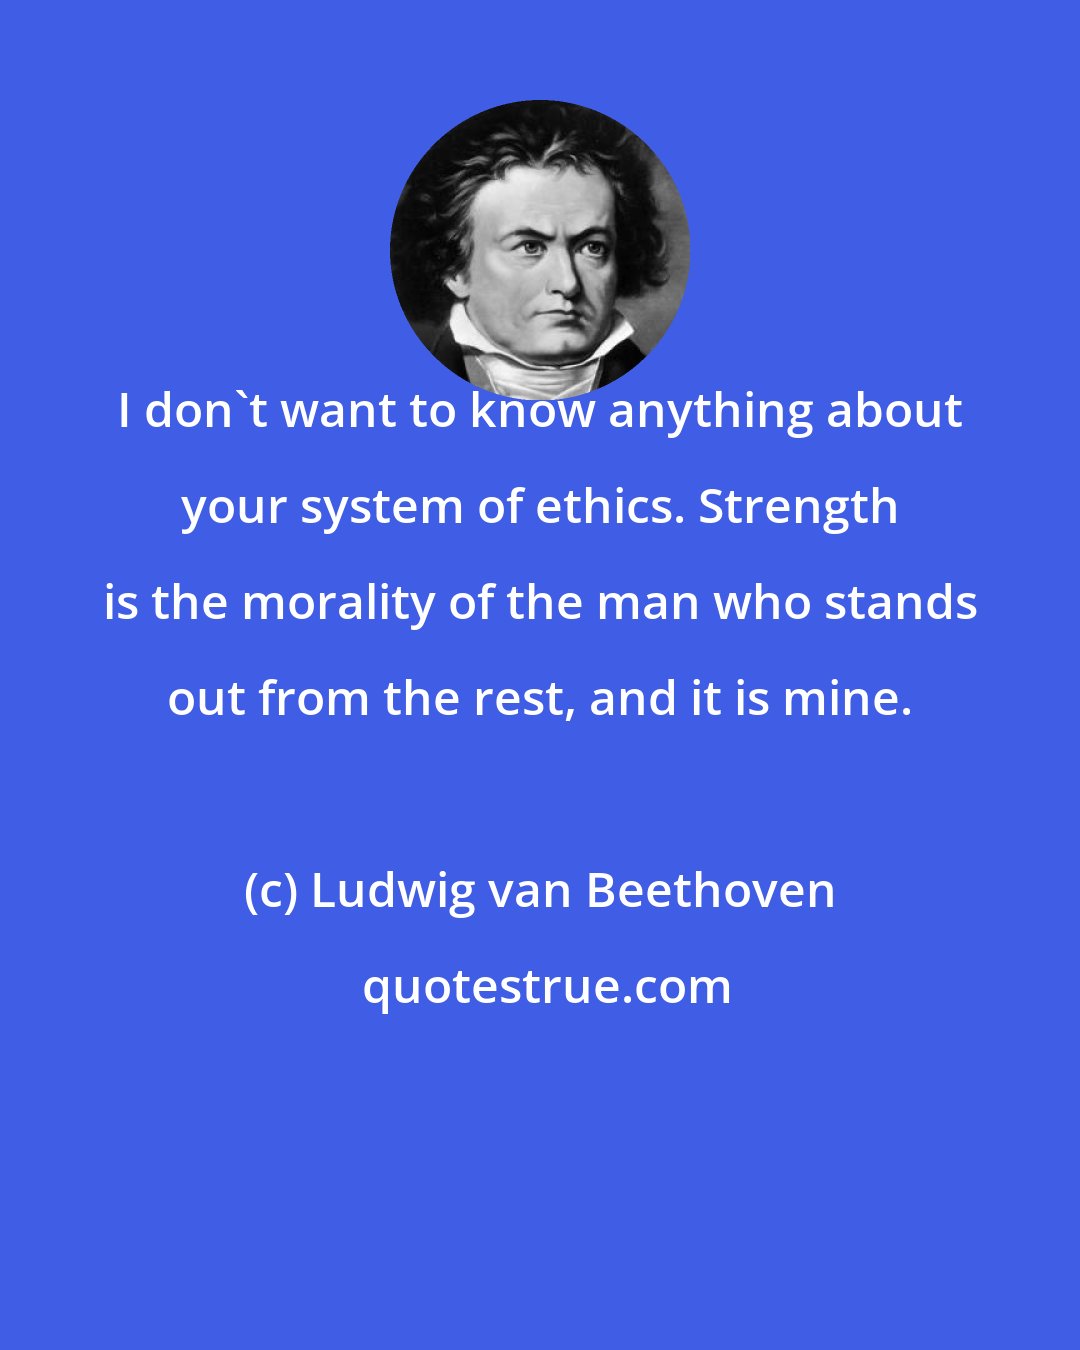 Ludwig van Beethoven: I don't want to know anything about your system of ethics. Strength is the morality of the man who stands out from the rest, and it is mine.